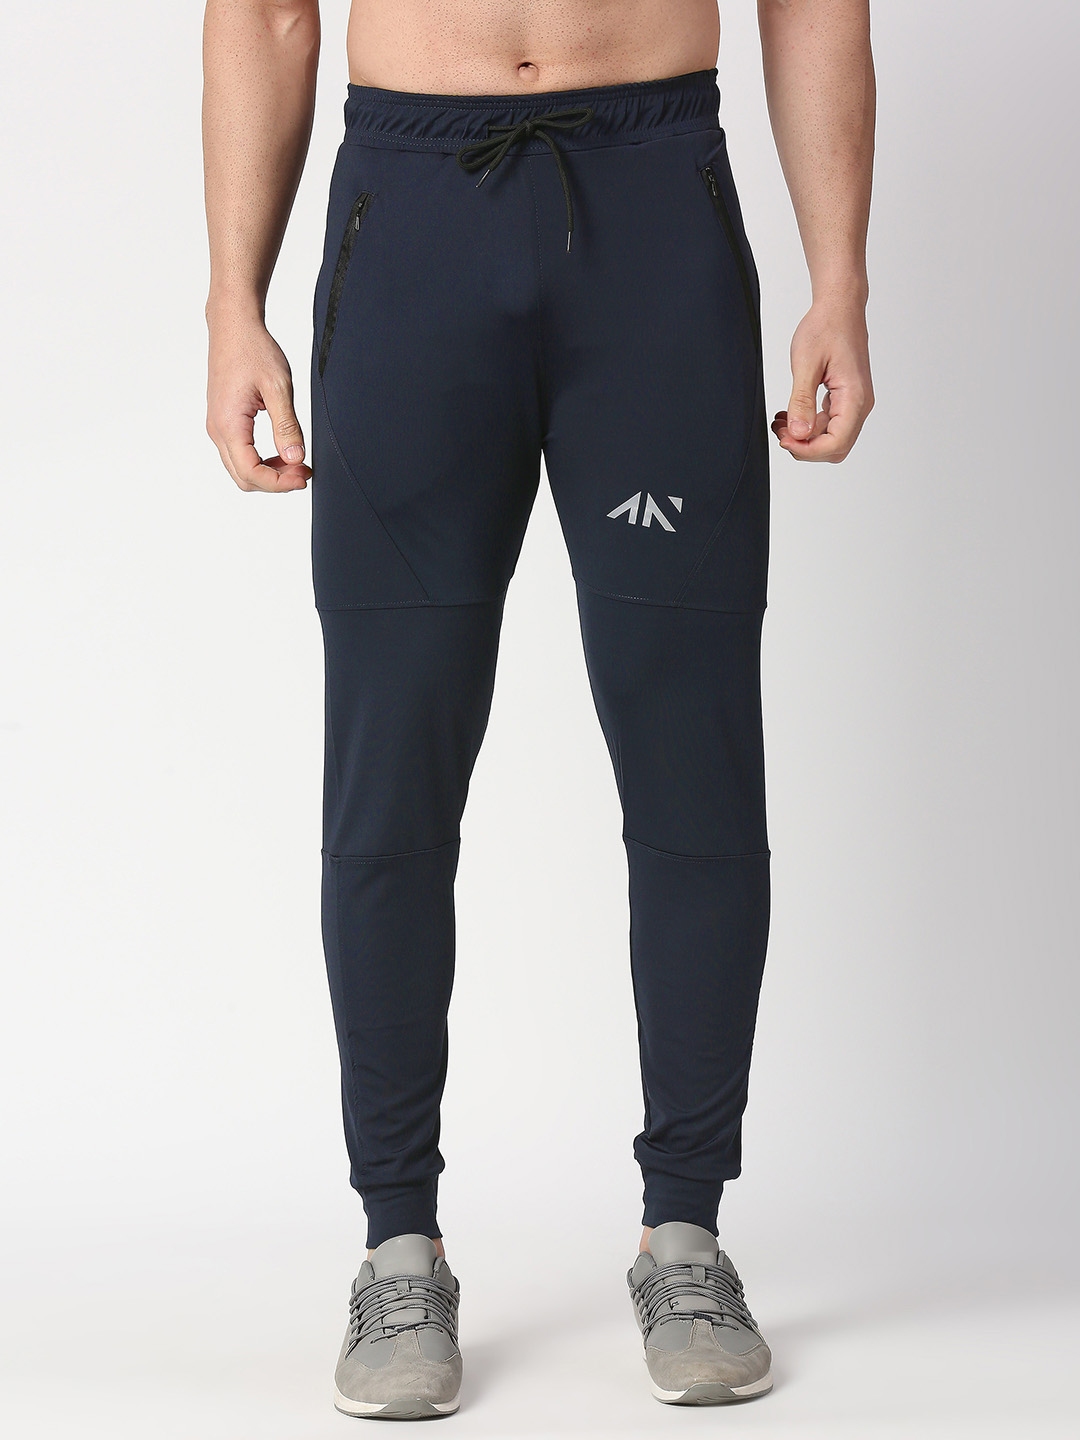 Invincible Men's Training Fitted Feather Weight Stretch Jogger Pants